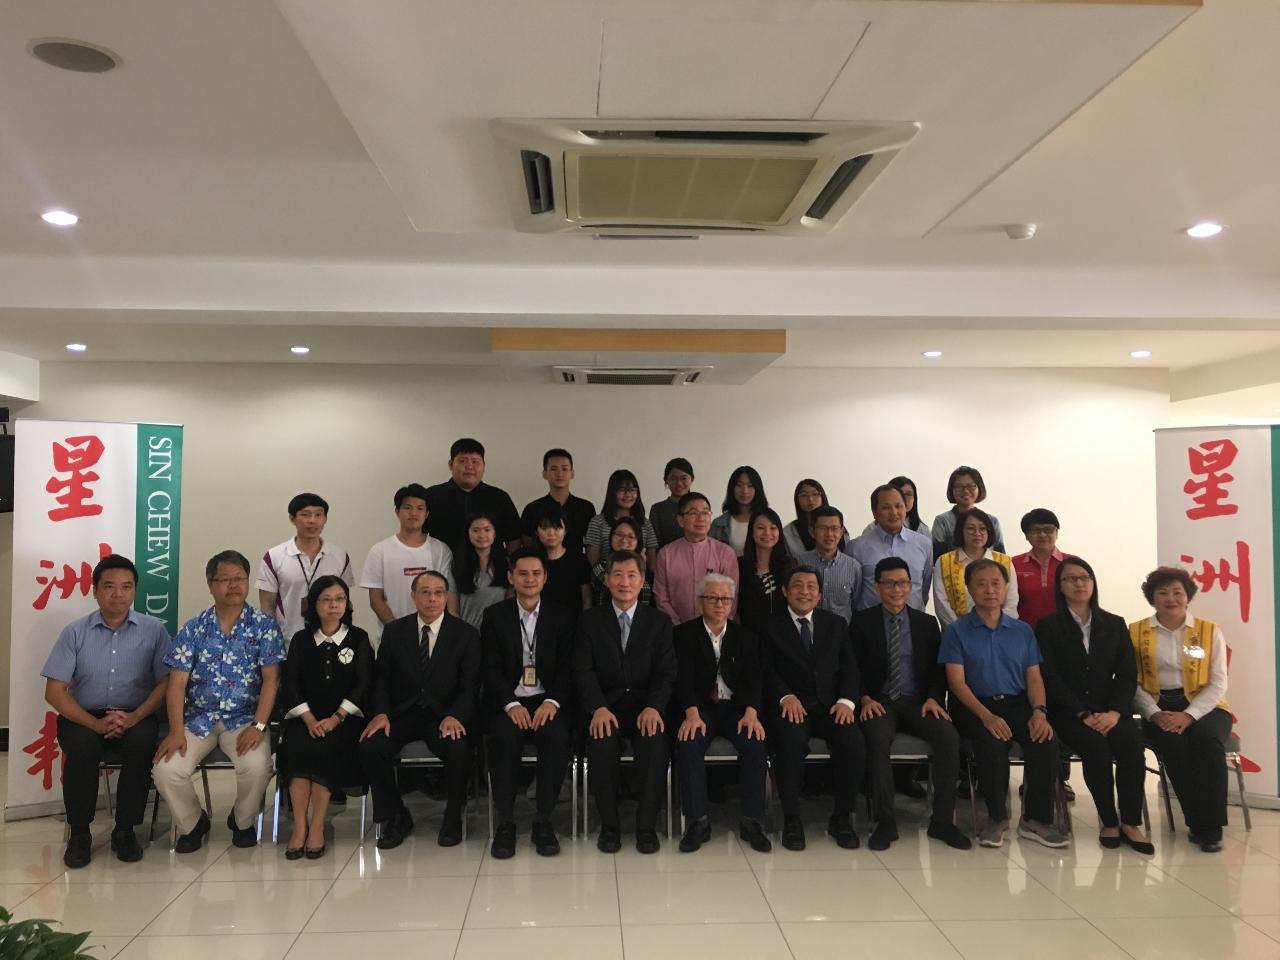 Deputy Representative Michael S.Y. Yiin took a group photo with VIPS and students award winning.